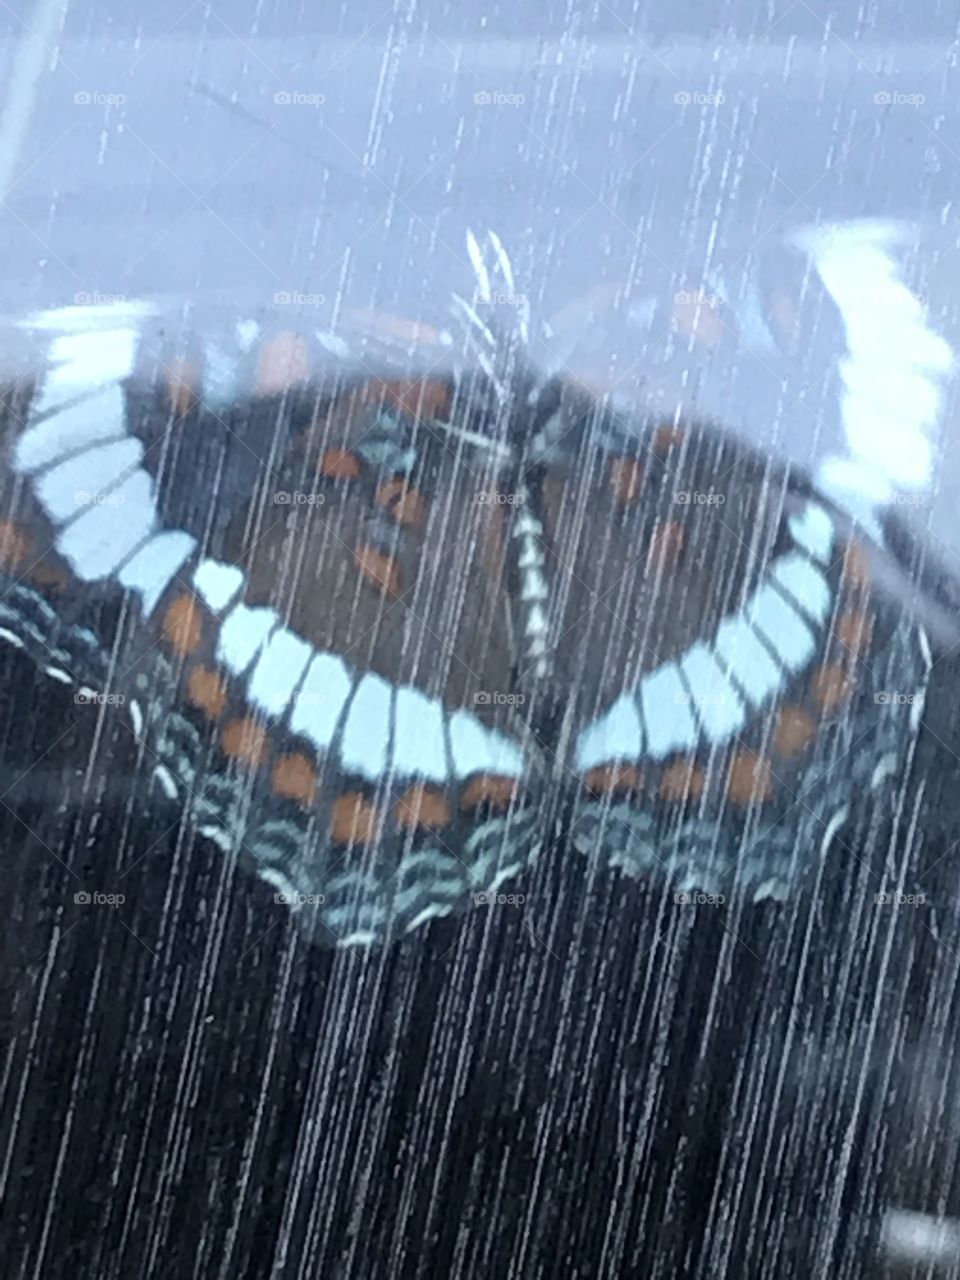 Butterfly behind reflected glass 